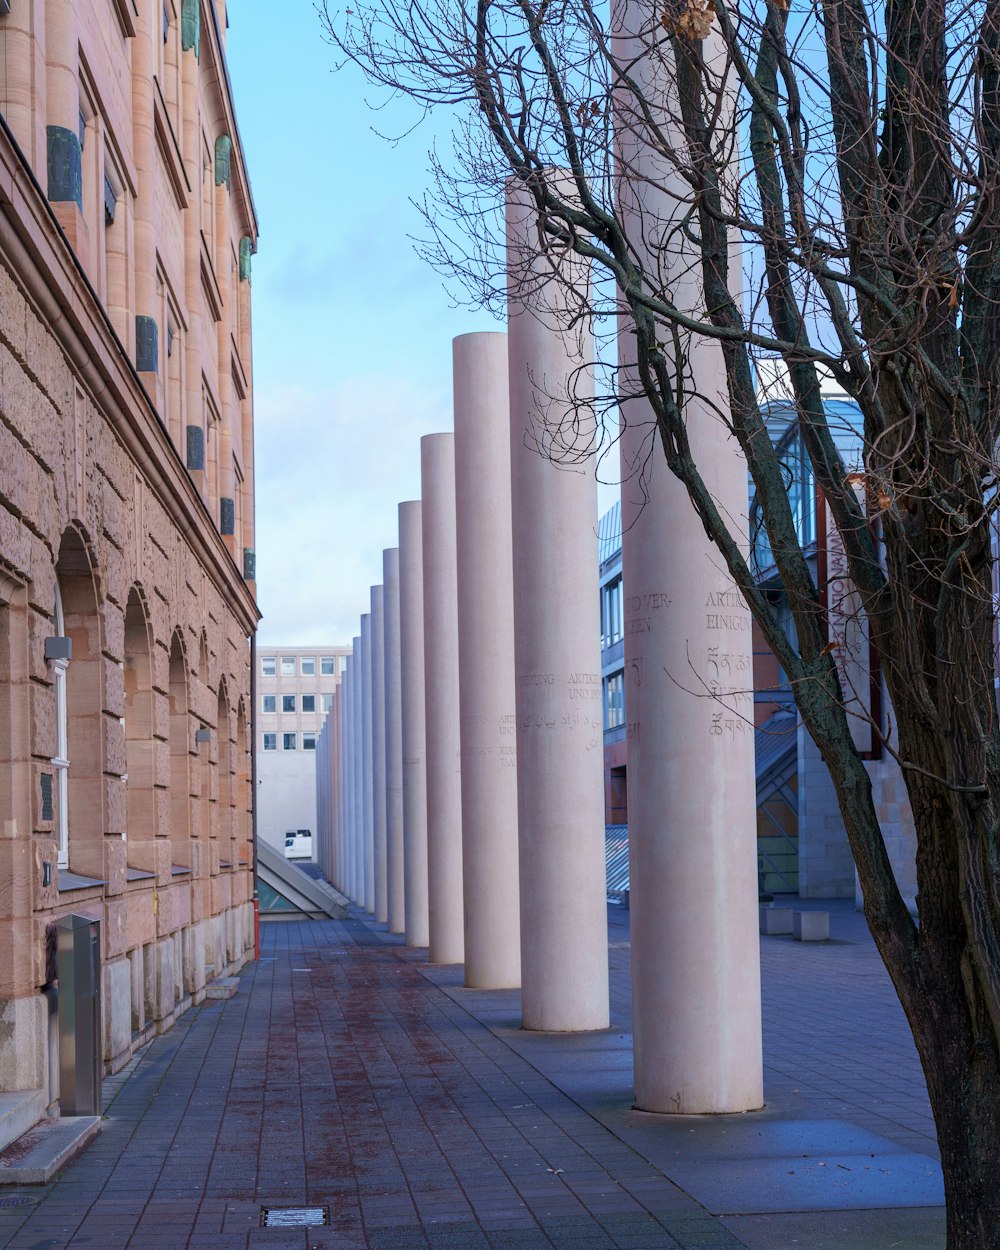 a street lined with tall white pillars next to a tree